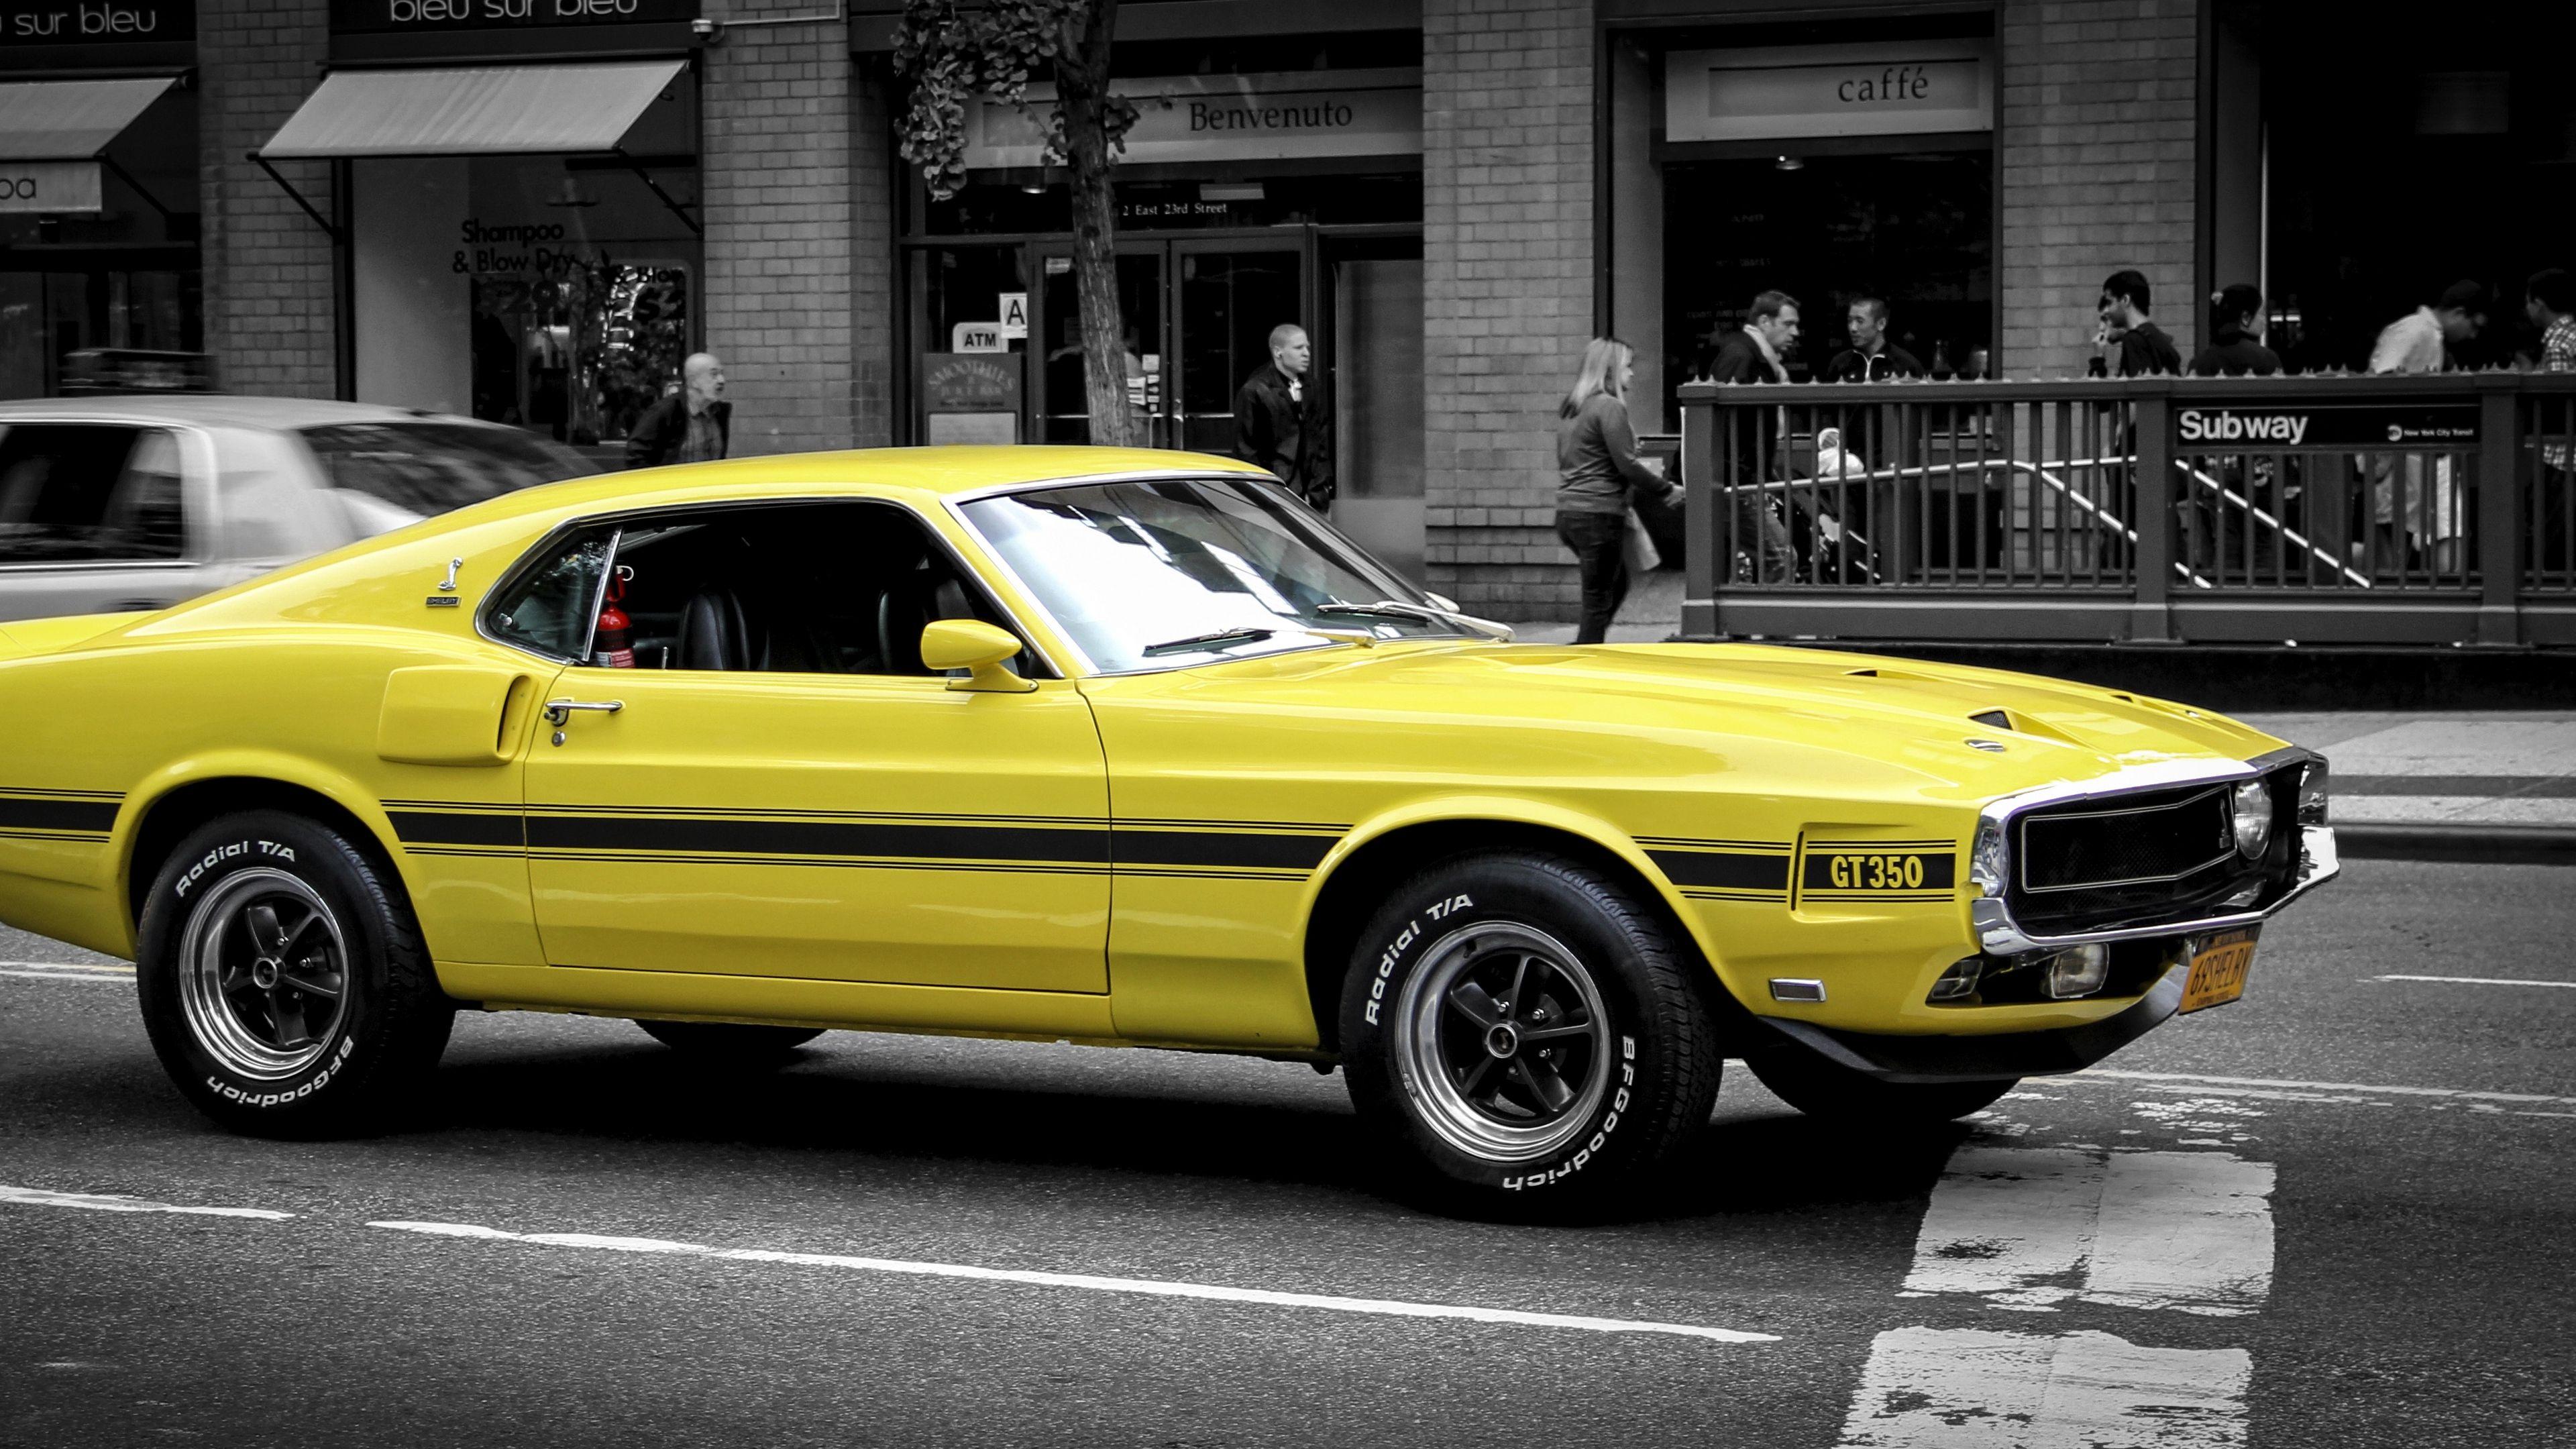 Download wallpaper 3840x2160 ford mustang, gt, muscle car, yellow